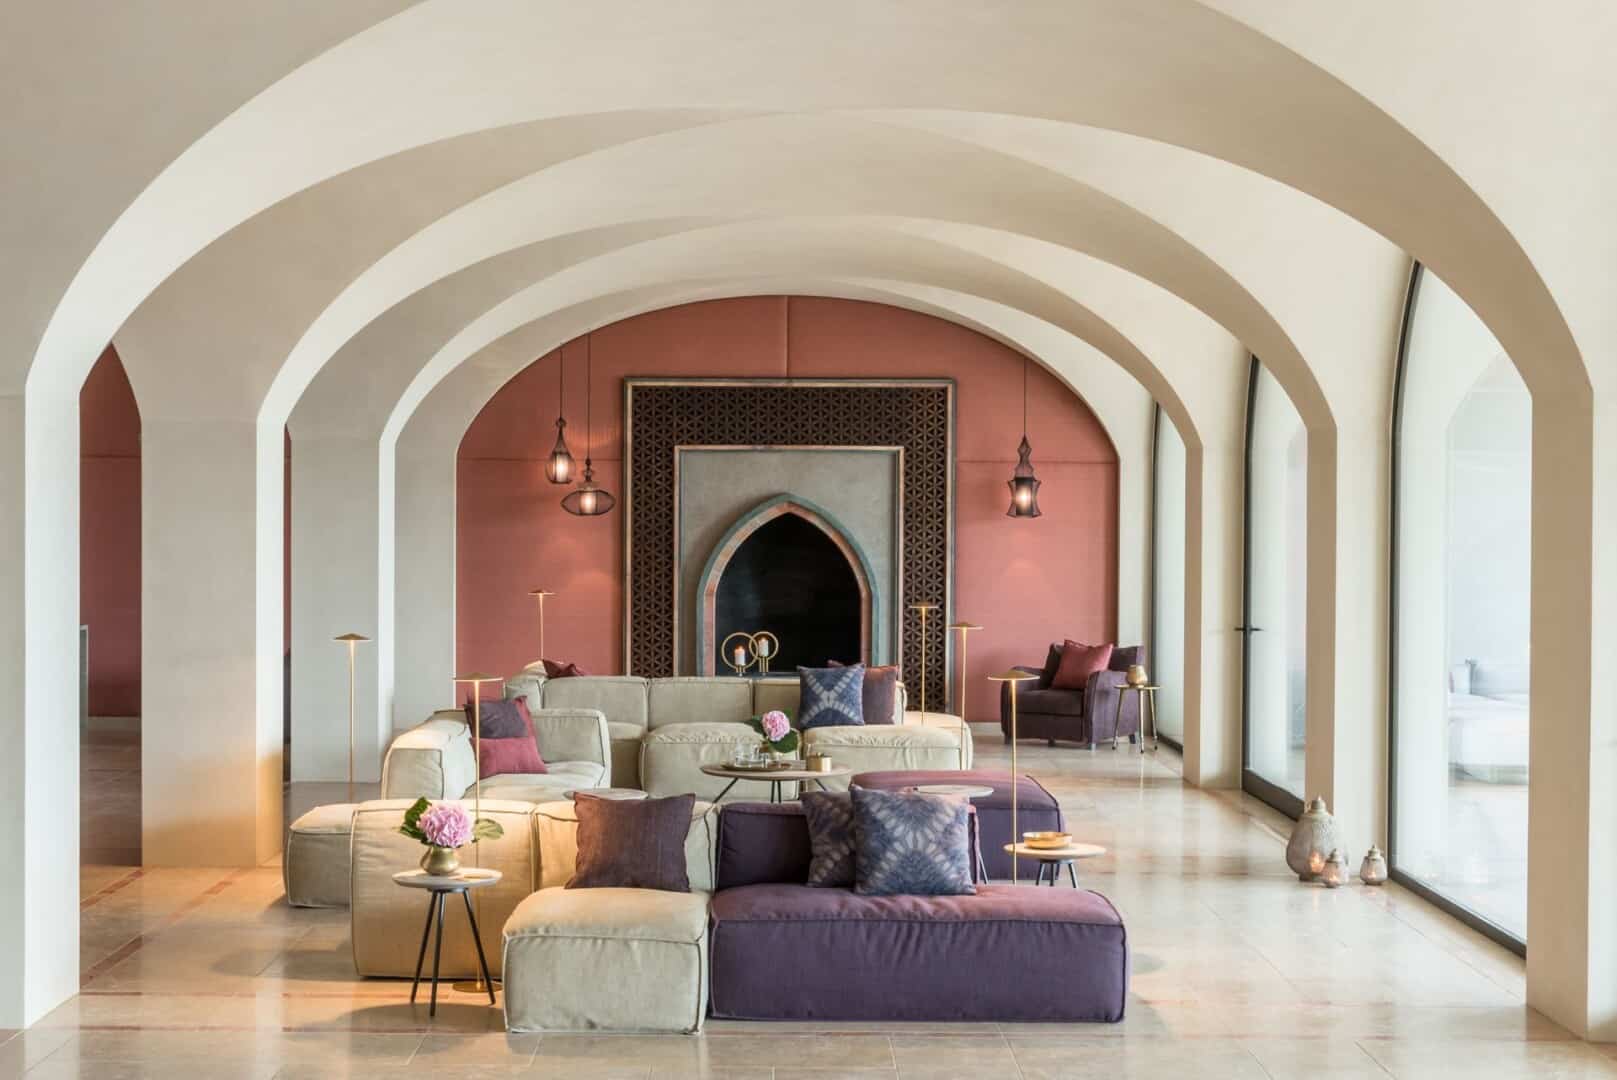 Clean arches at Euphoria Retreat with boho-chic living room in shades of beige and purple, featuring a Moroccan wall piece.